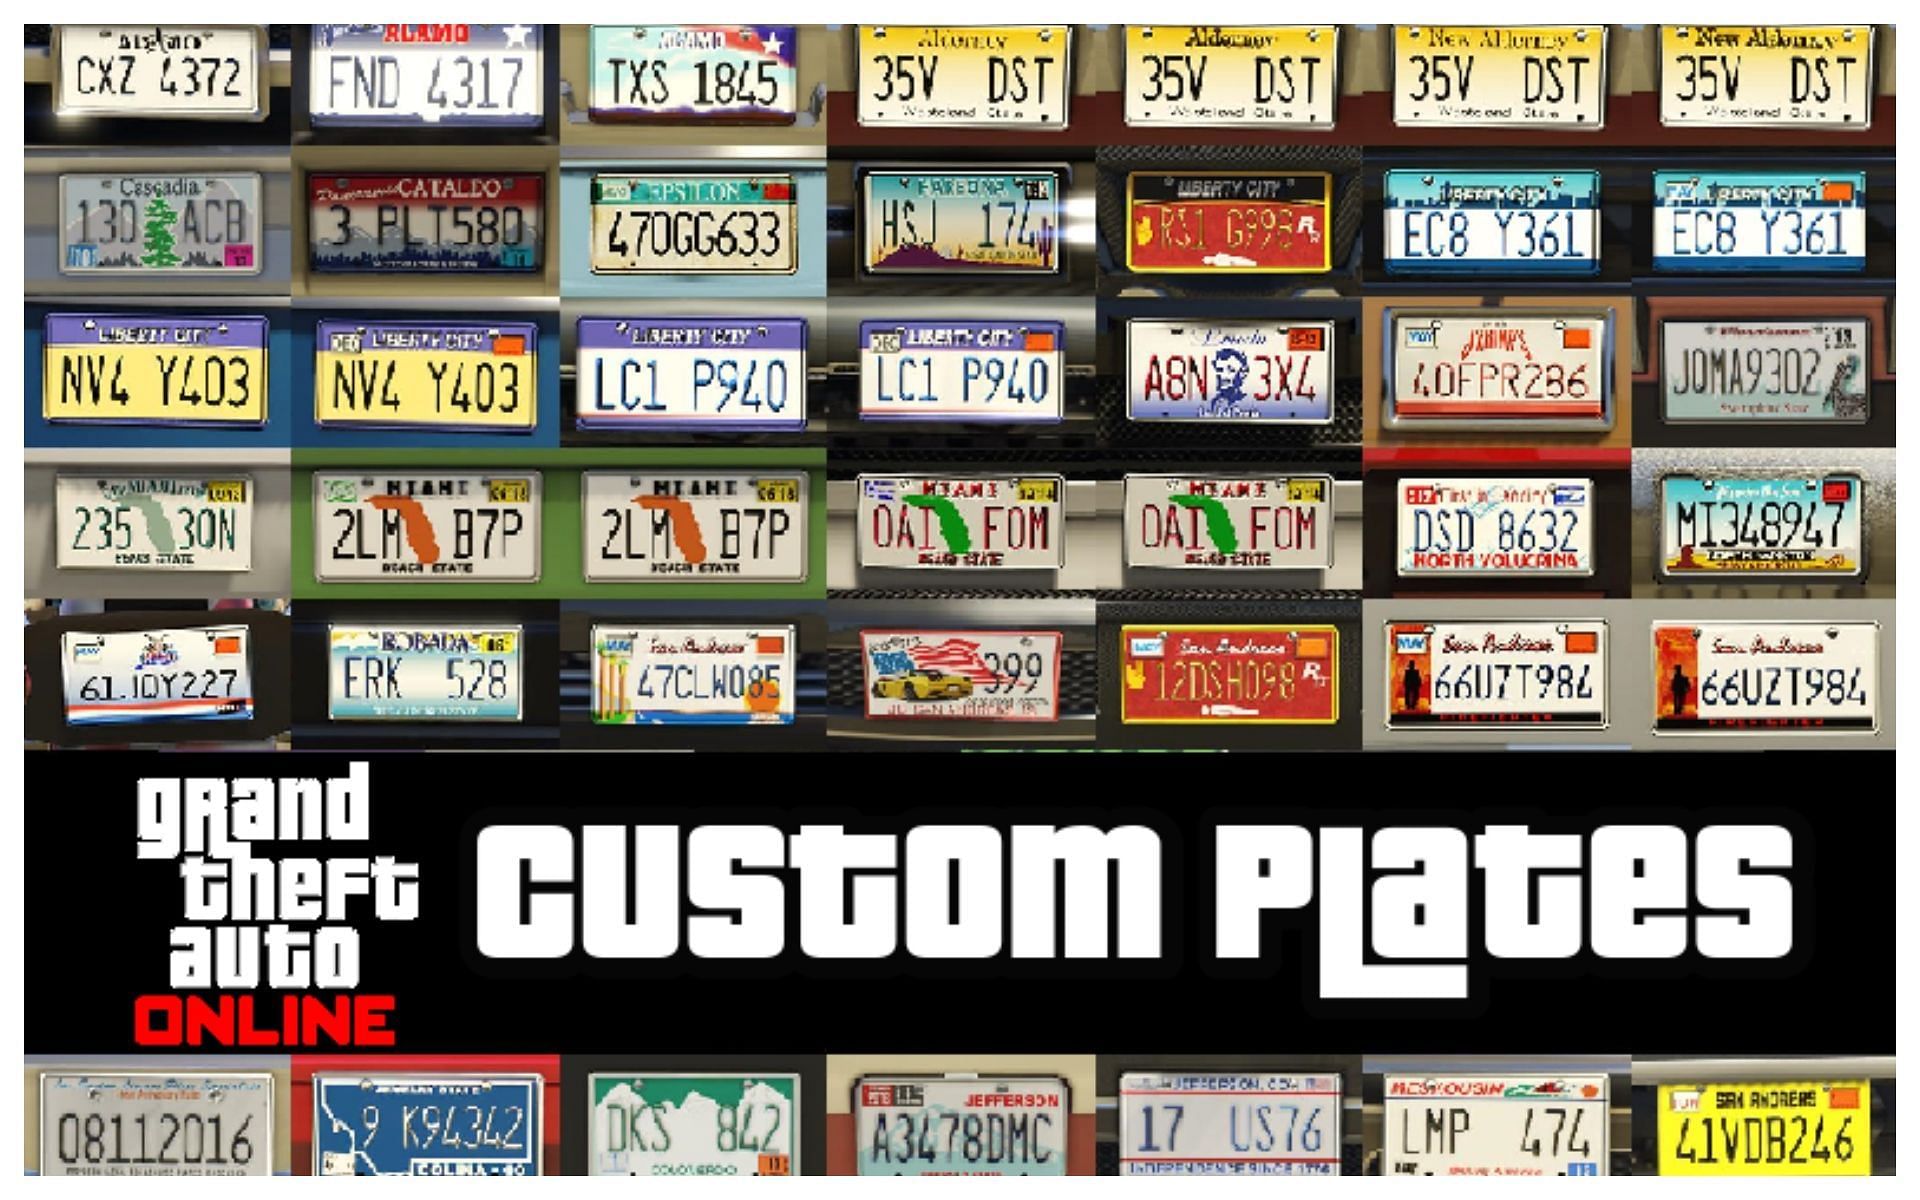 Customize your car even more with a new custom license plate (Image via Sportskeeda)